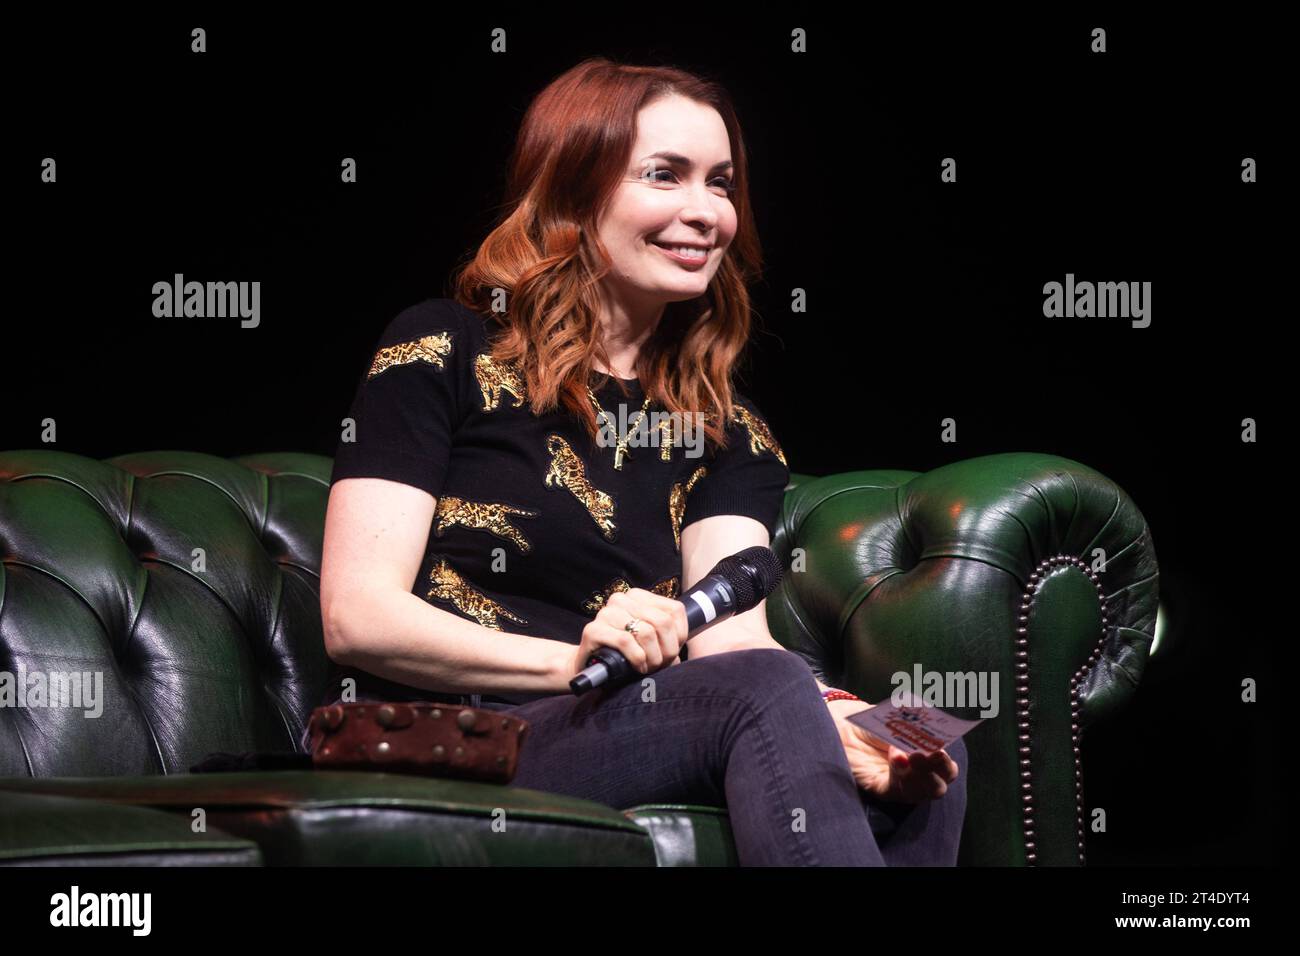 Felicia Day Day Two of MCM Comic Con at ExCeL exhibition centre in London on October 27, 2023 - BANG MEDIA INTERNATIONAL FAMOUS PICTURES 28 HOLMES ROAD LONDON NW5 3AB UNITED KINGDOM tel 44 0 02 7485 1005 email: paulsmithbangshowbiz.com or tombangshowbiz.com Copyright: xTomxRosex adnrp914 Credit: Imago/Alamy Live News Stock Photo